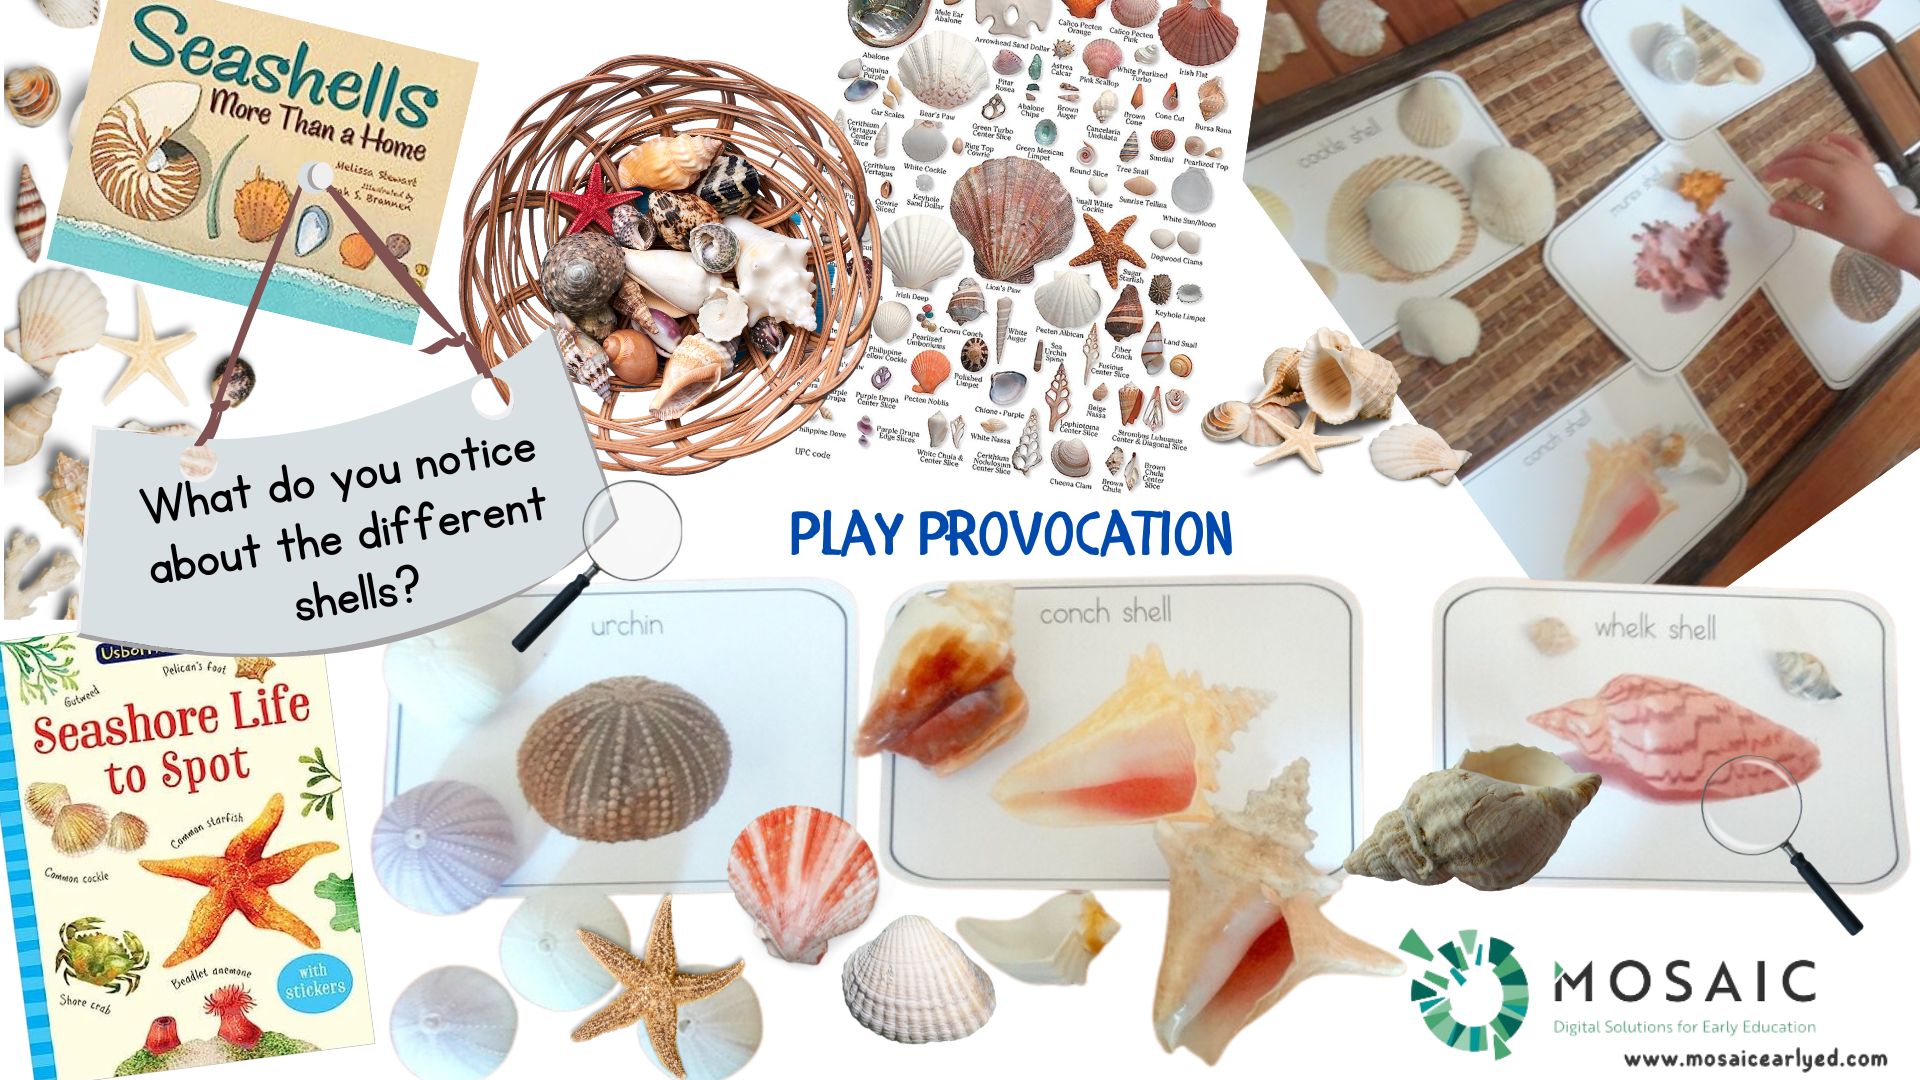 Invitations and Provocations – what’s the difference?